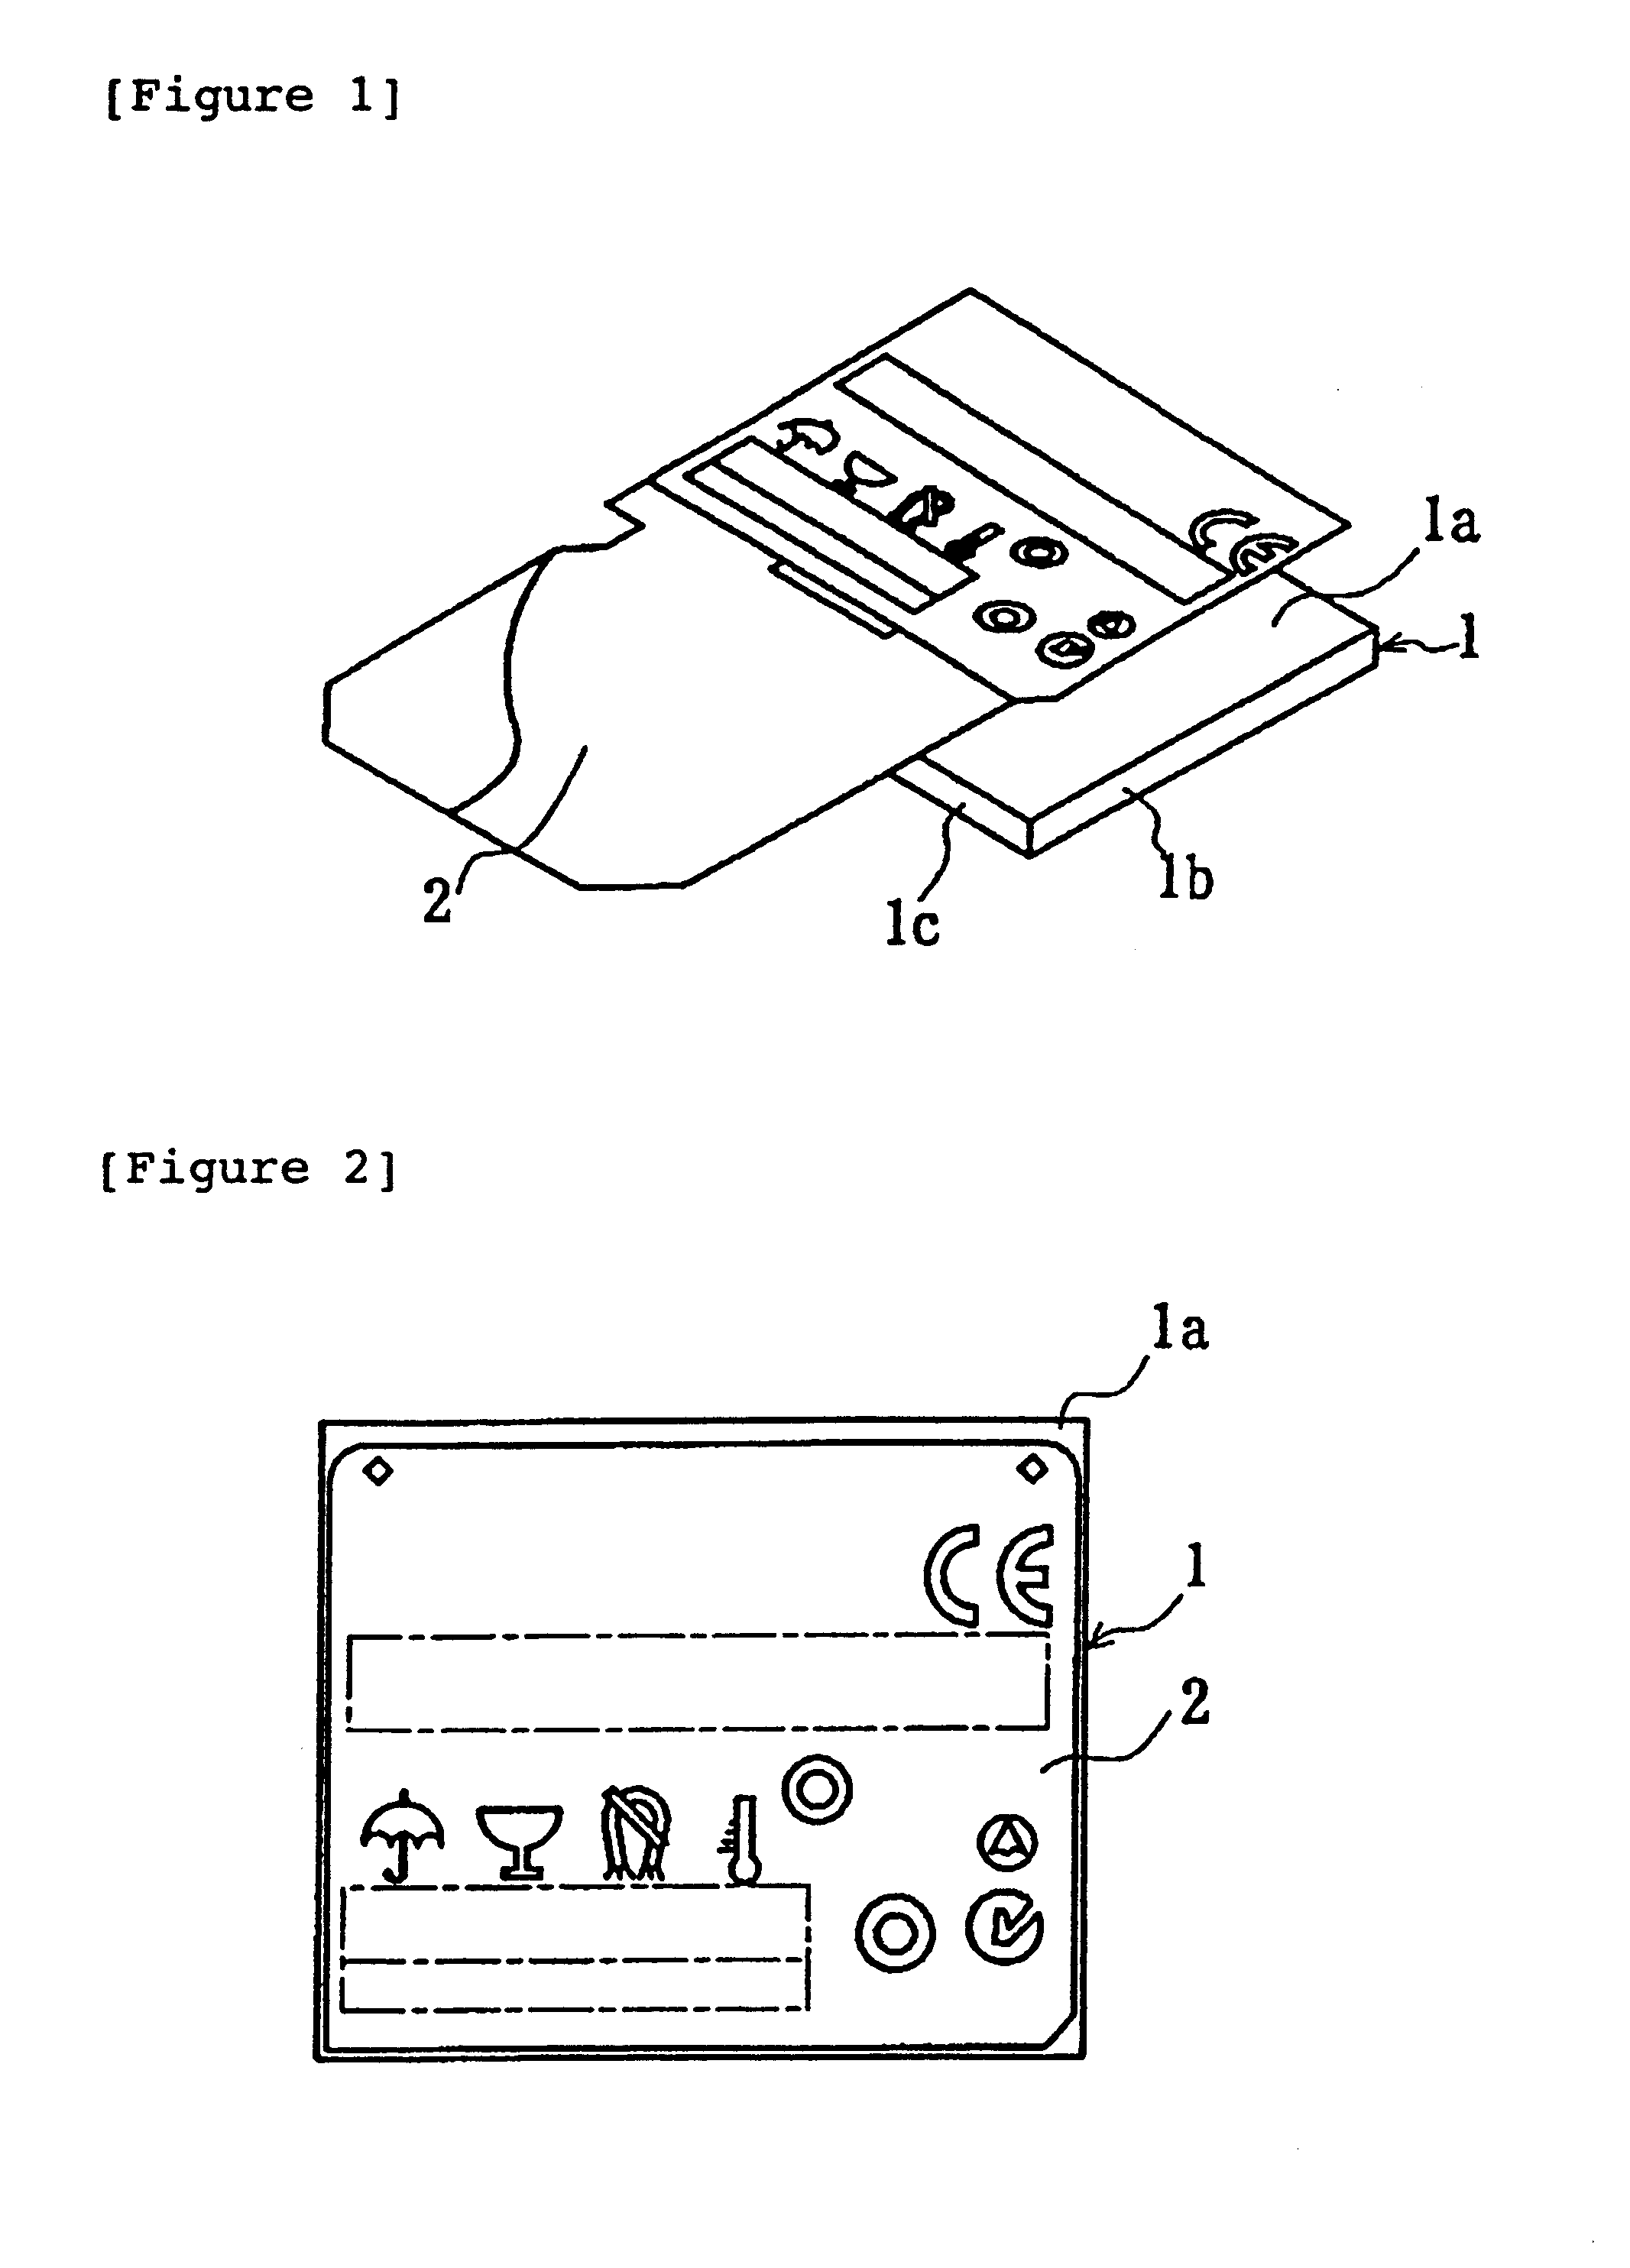 Hard disk drive with electrically conductive sheet for electrostatic discharge protection